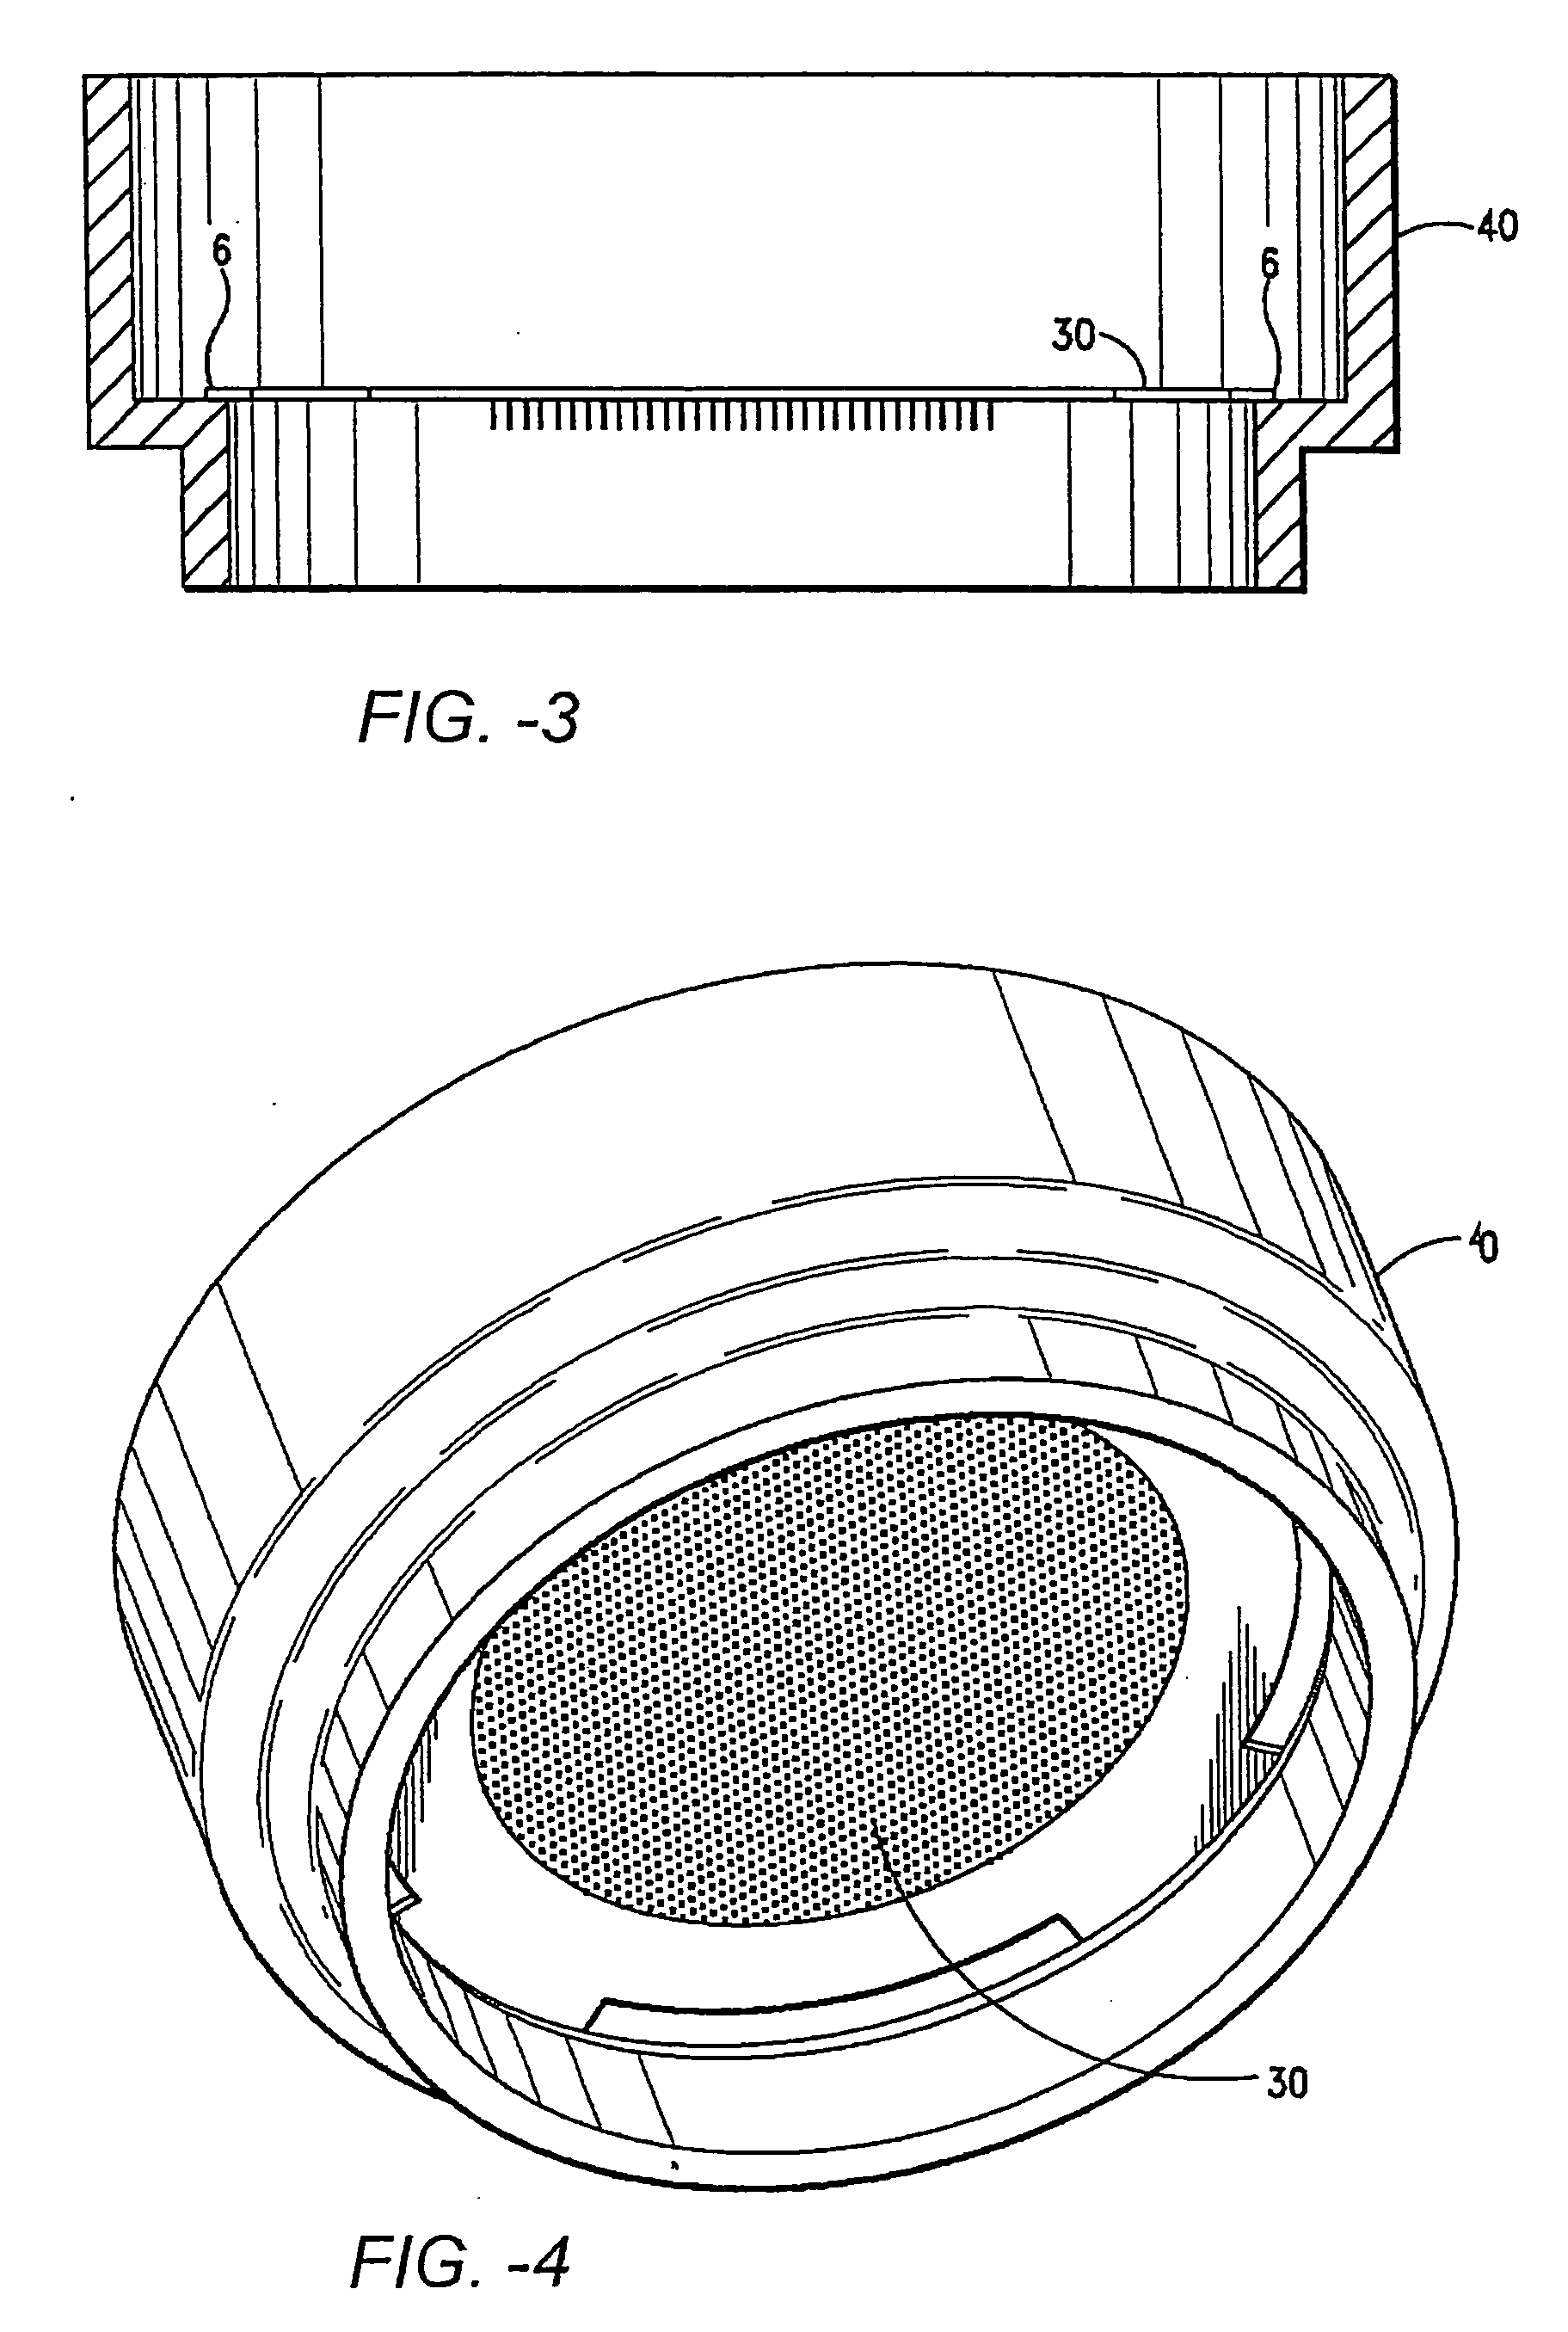 Method for terminal sterilization of transdermal delivery devices